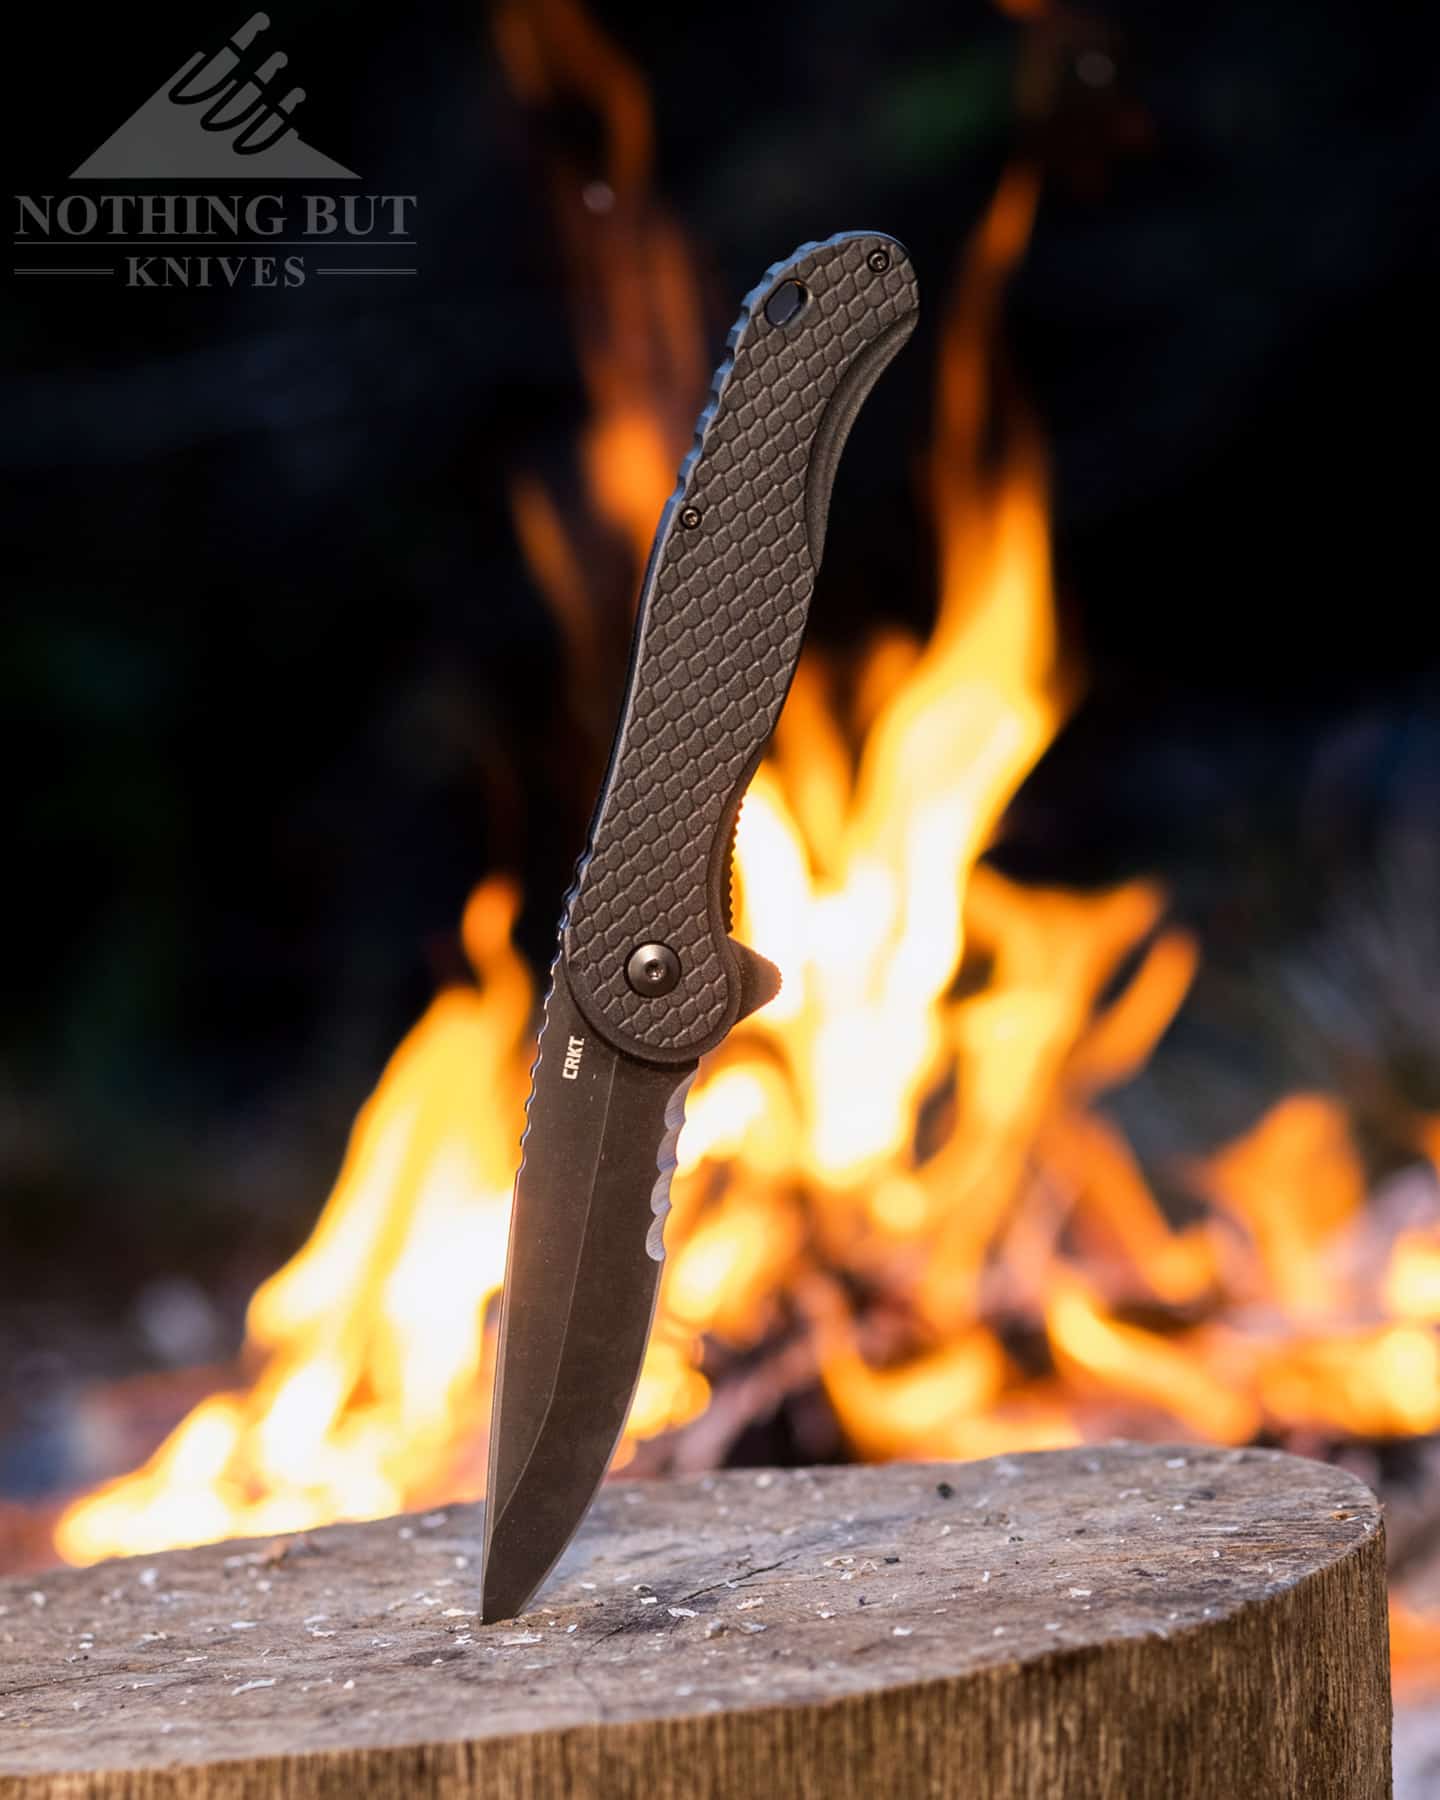 The CRKT Taco Viper is a good option for camping or backpacking.